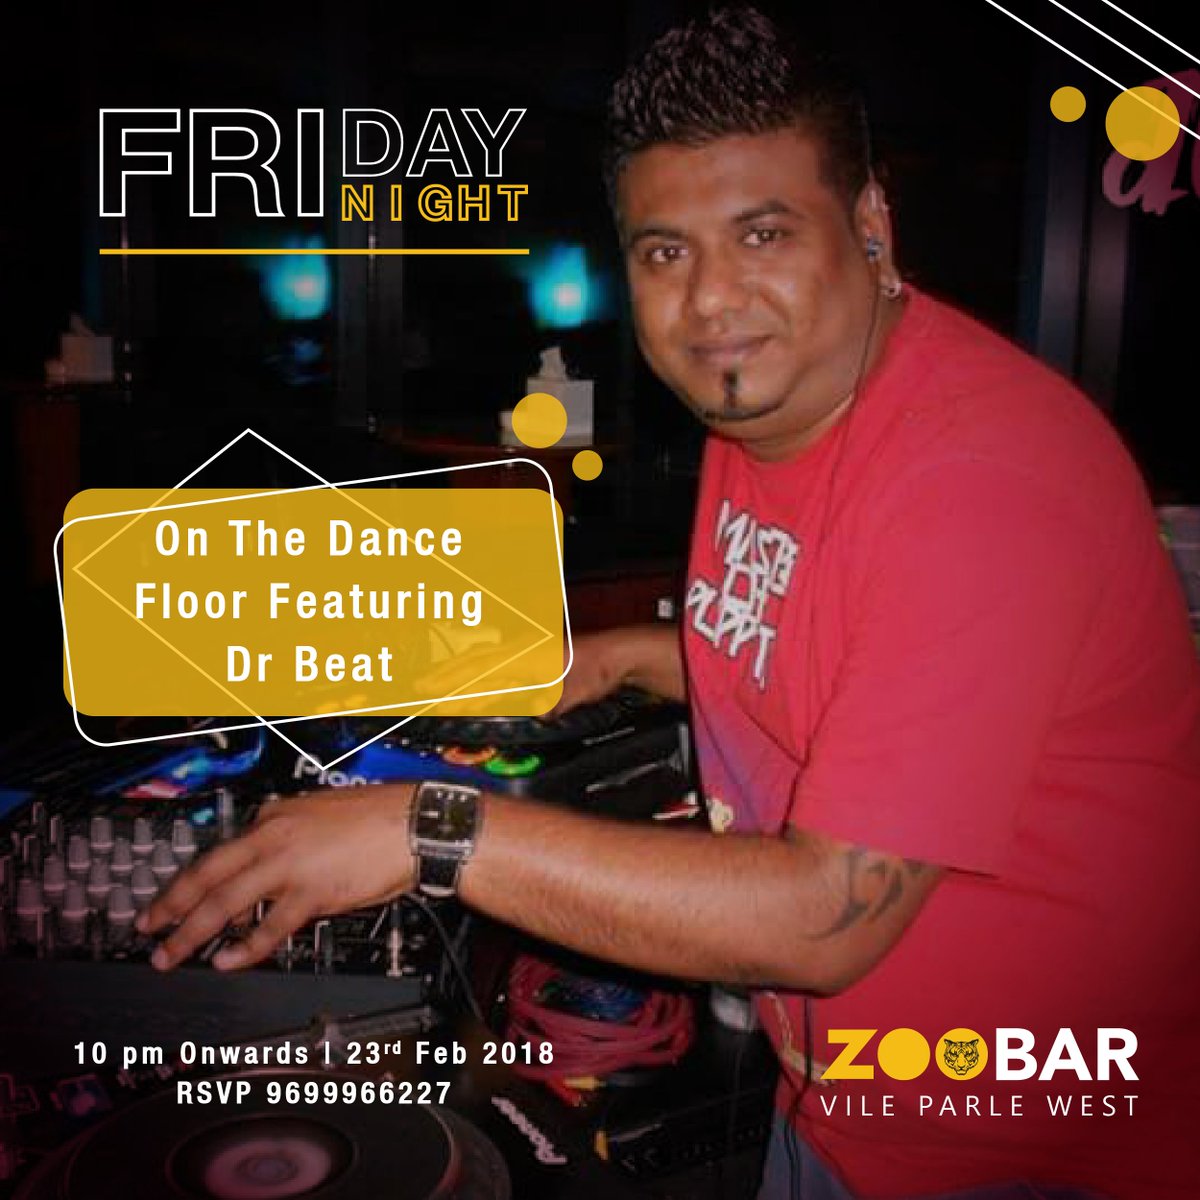 Zoobar On Twitter Friday Night On The Dance Floor Featuring Dr